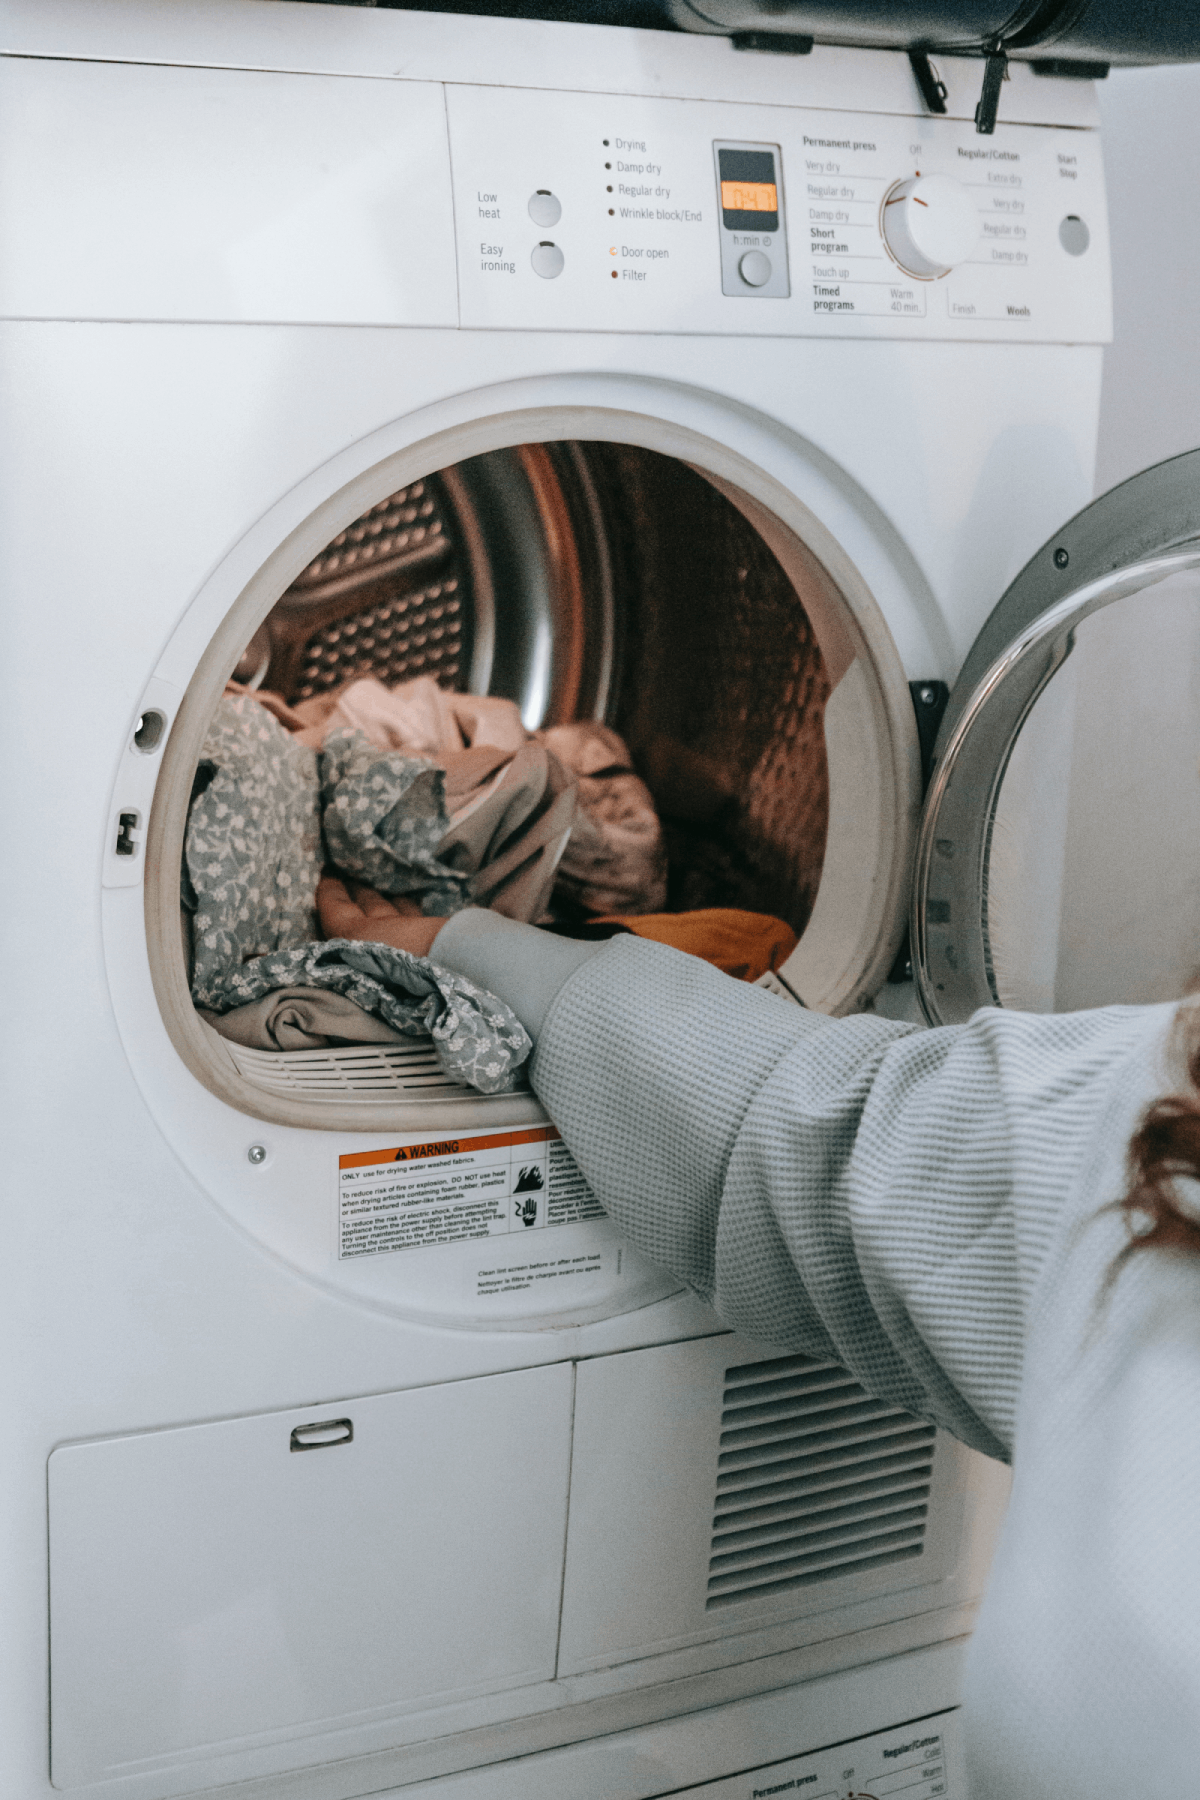 Putting laundry in the machine. Putting clothes in the washing machine. Clothes in the washer. Washer and Dryer. Washing machine. Loading the laundry.